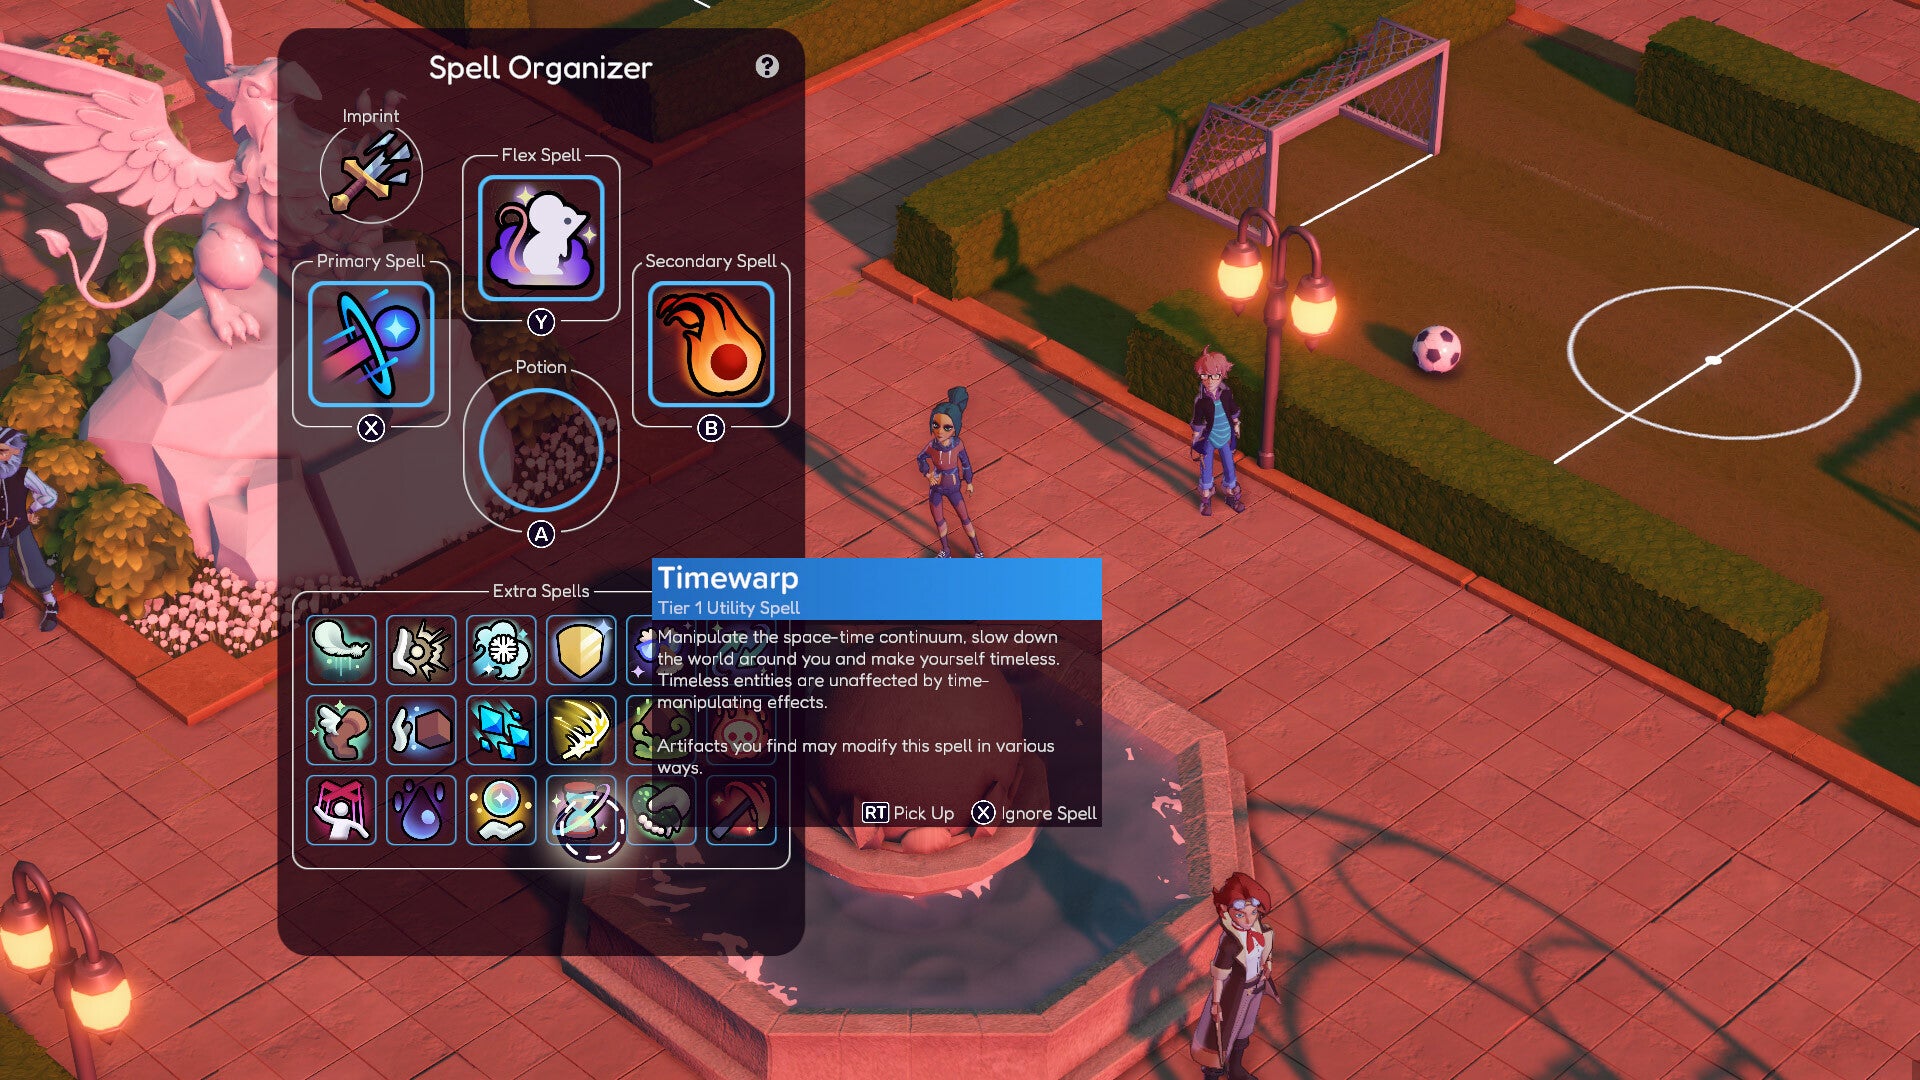 A hotbar shows a character's active spells in Spells & Secrets, against the background of an outdoor area of the school including a football pitch.